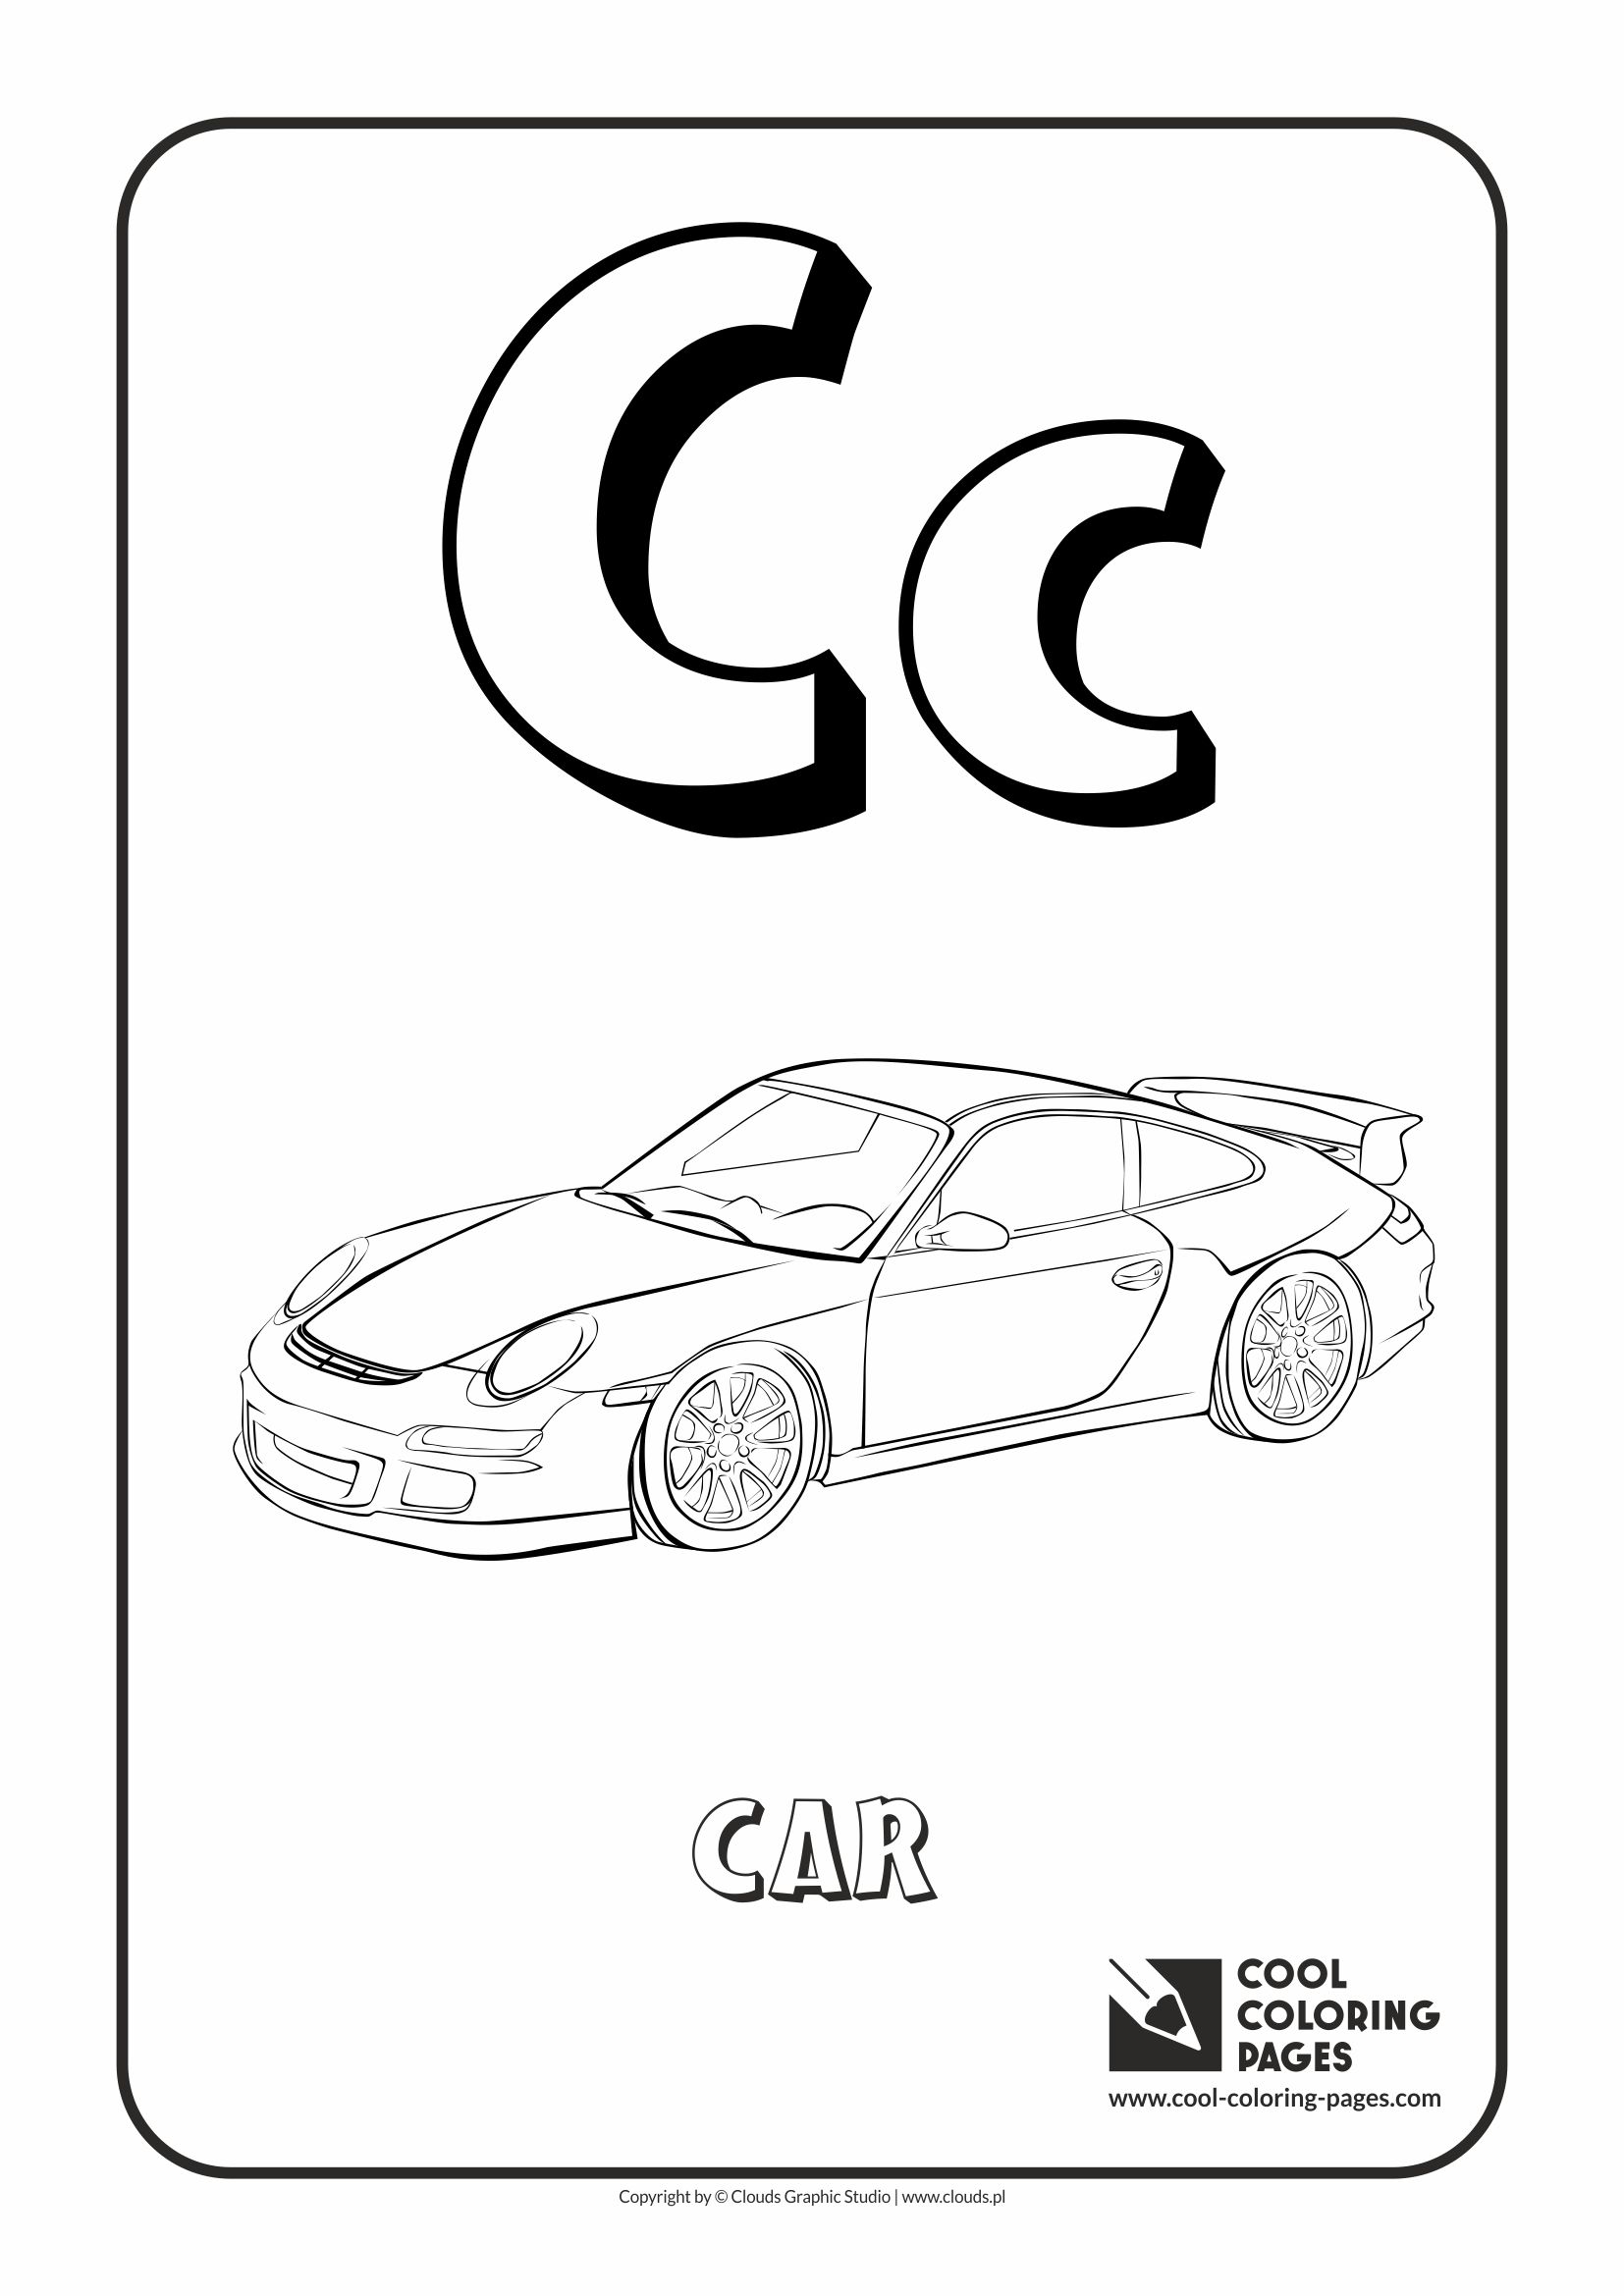 abc coloring pages games cool - photo #14